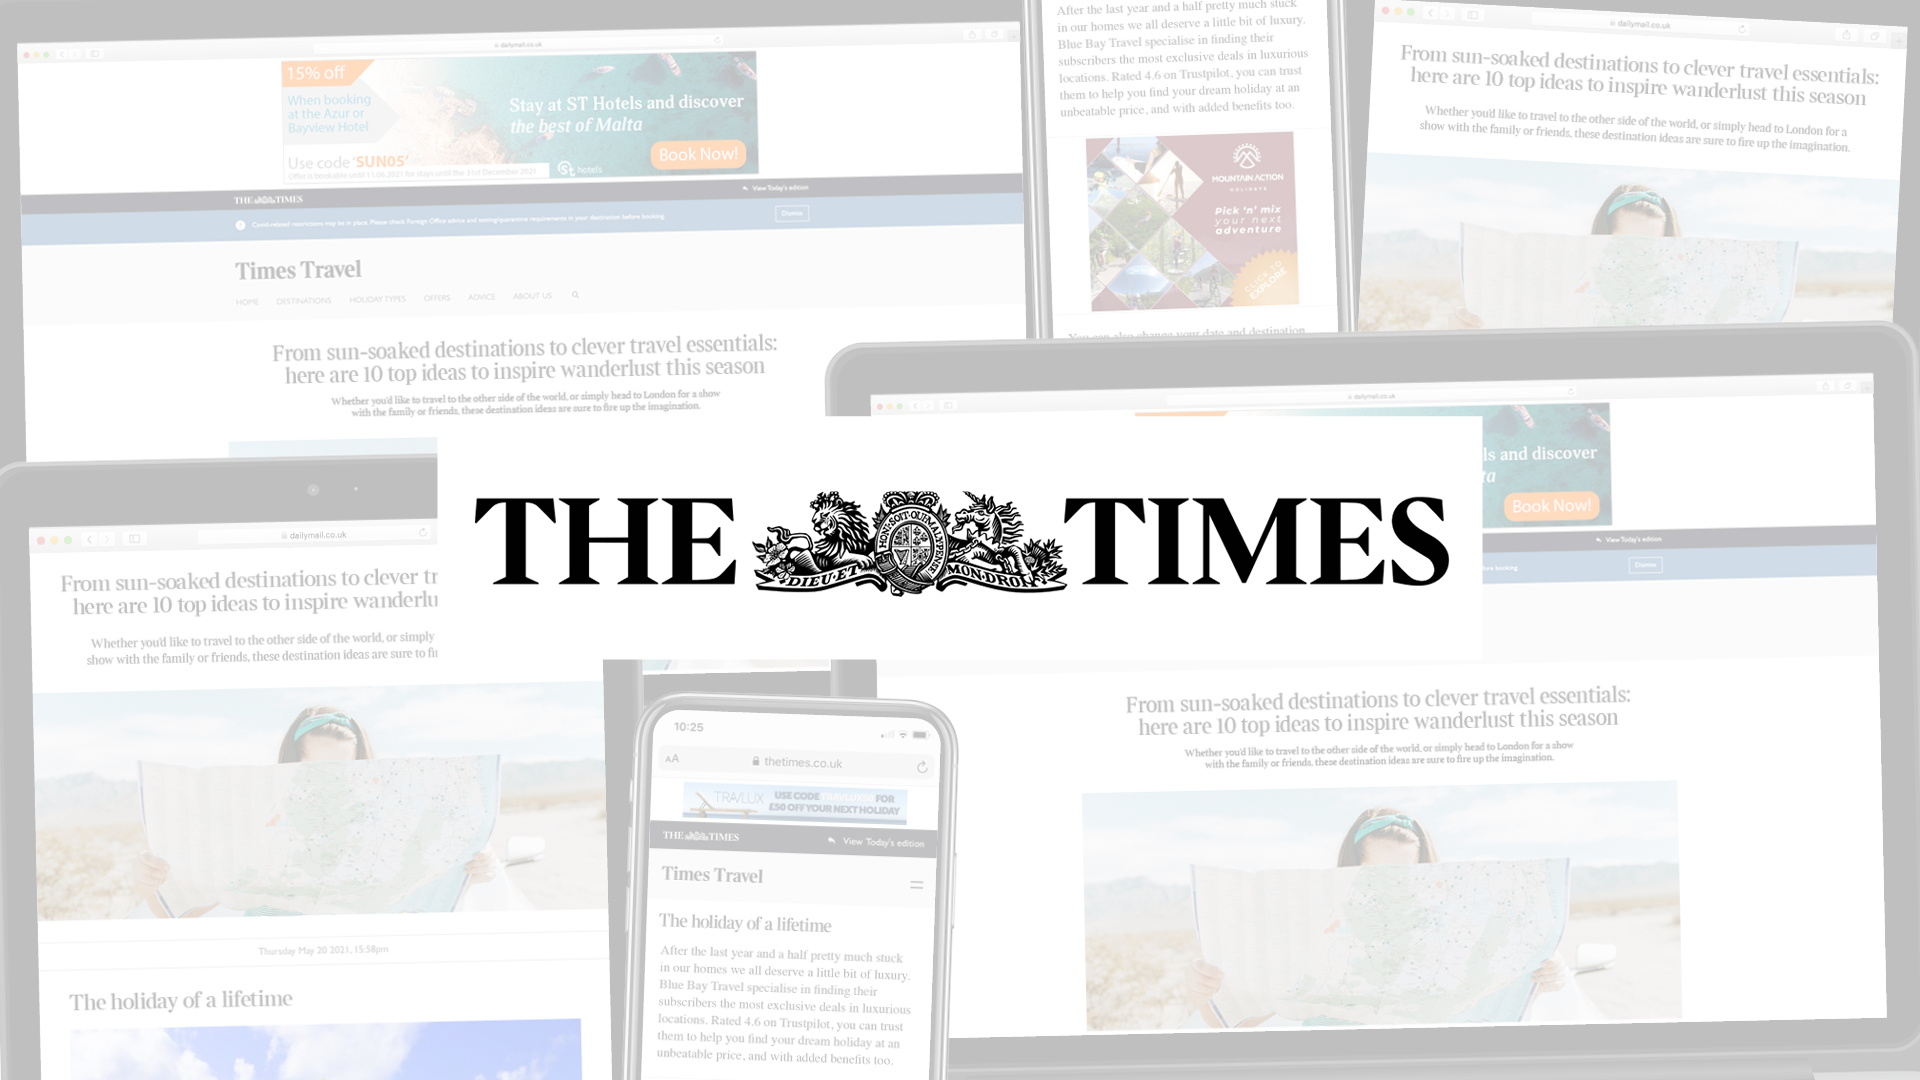 Times Online